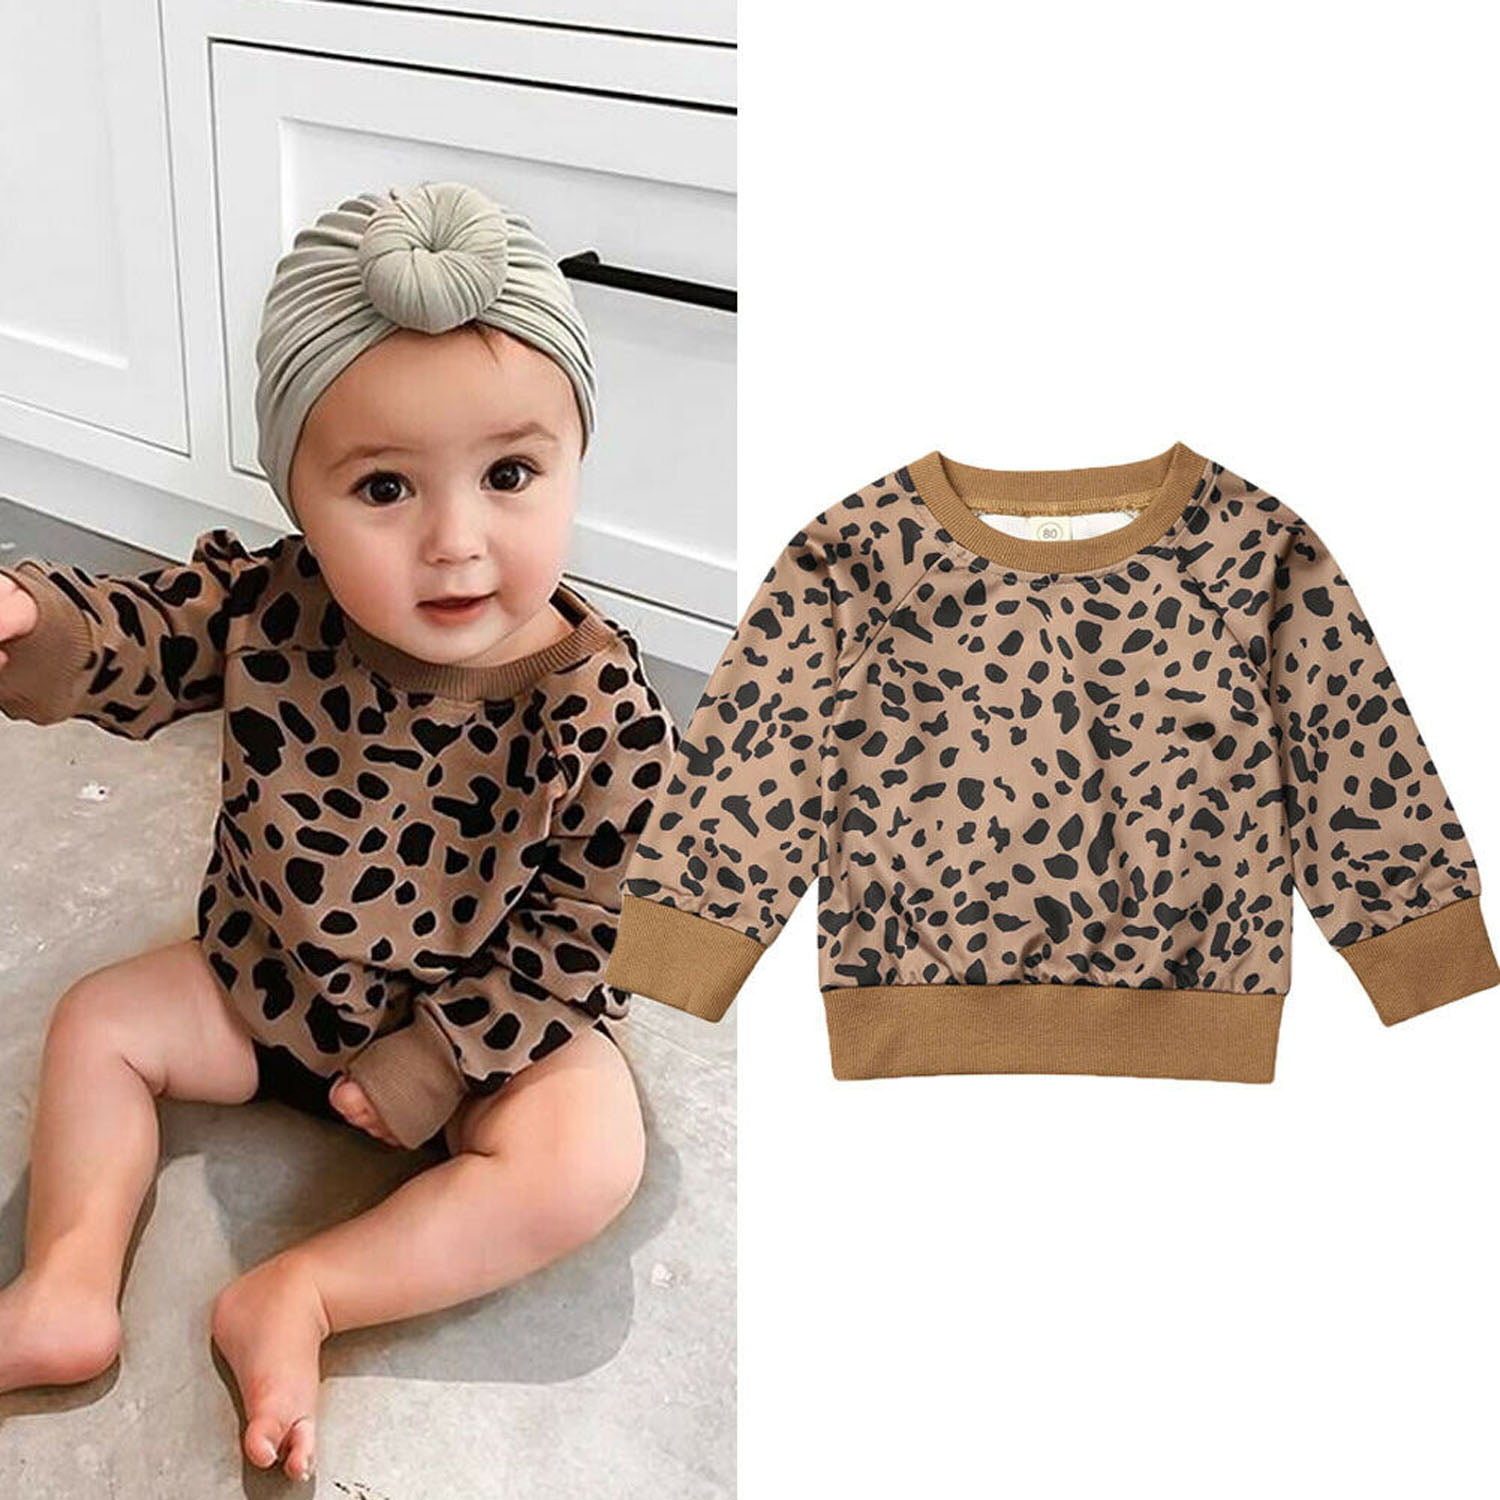 Toddler Baby Girls Boys Leopard Sweatshirt Casual Pullover Sweater Long Sleeve Shirt Blouse Tops Outfit Clothes